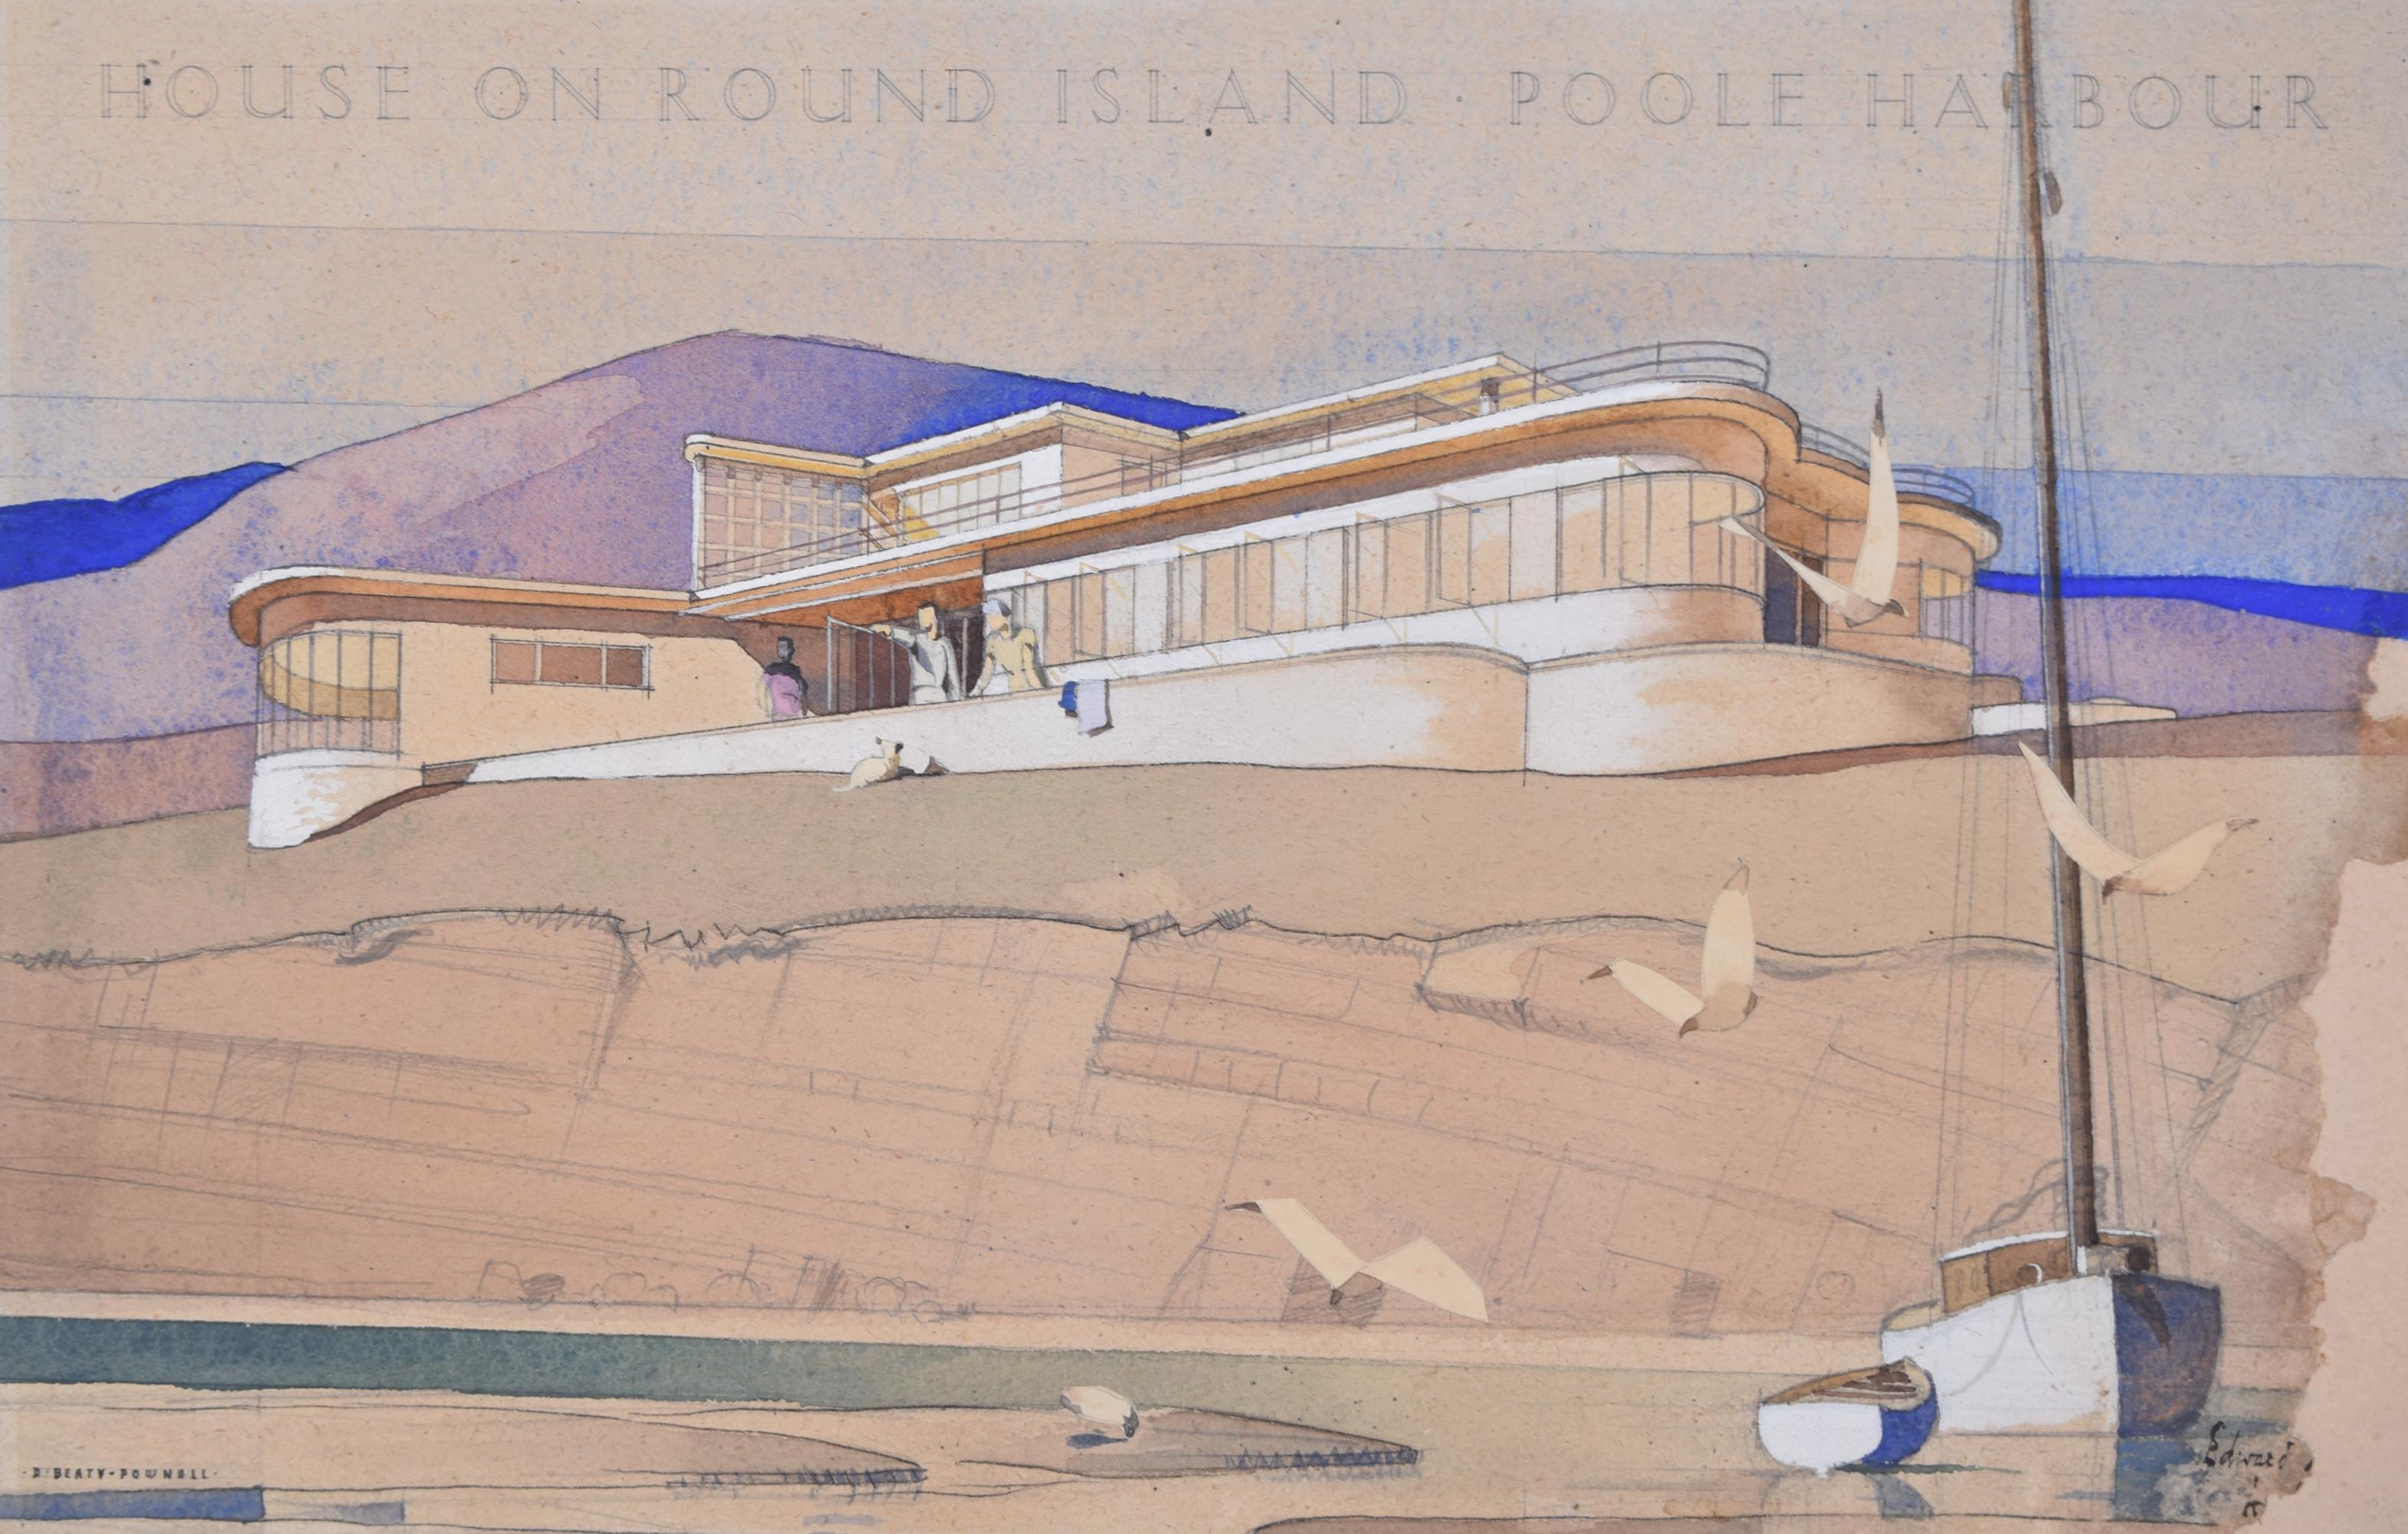 To see our other Architectural Drawings, scroll down to "More from this Seller" and below it click on "See all from this Seller" and then search.

Sir Edward Maufe (1882 - 1974)
Design for House on Round Island, Poole Harbour
Watercolour and